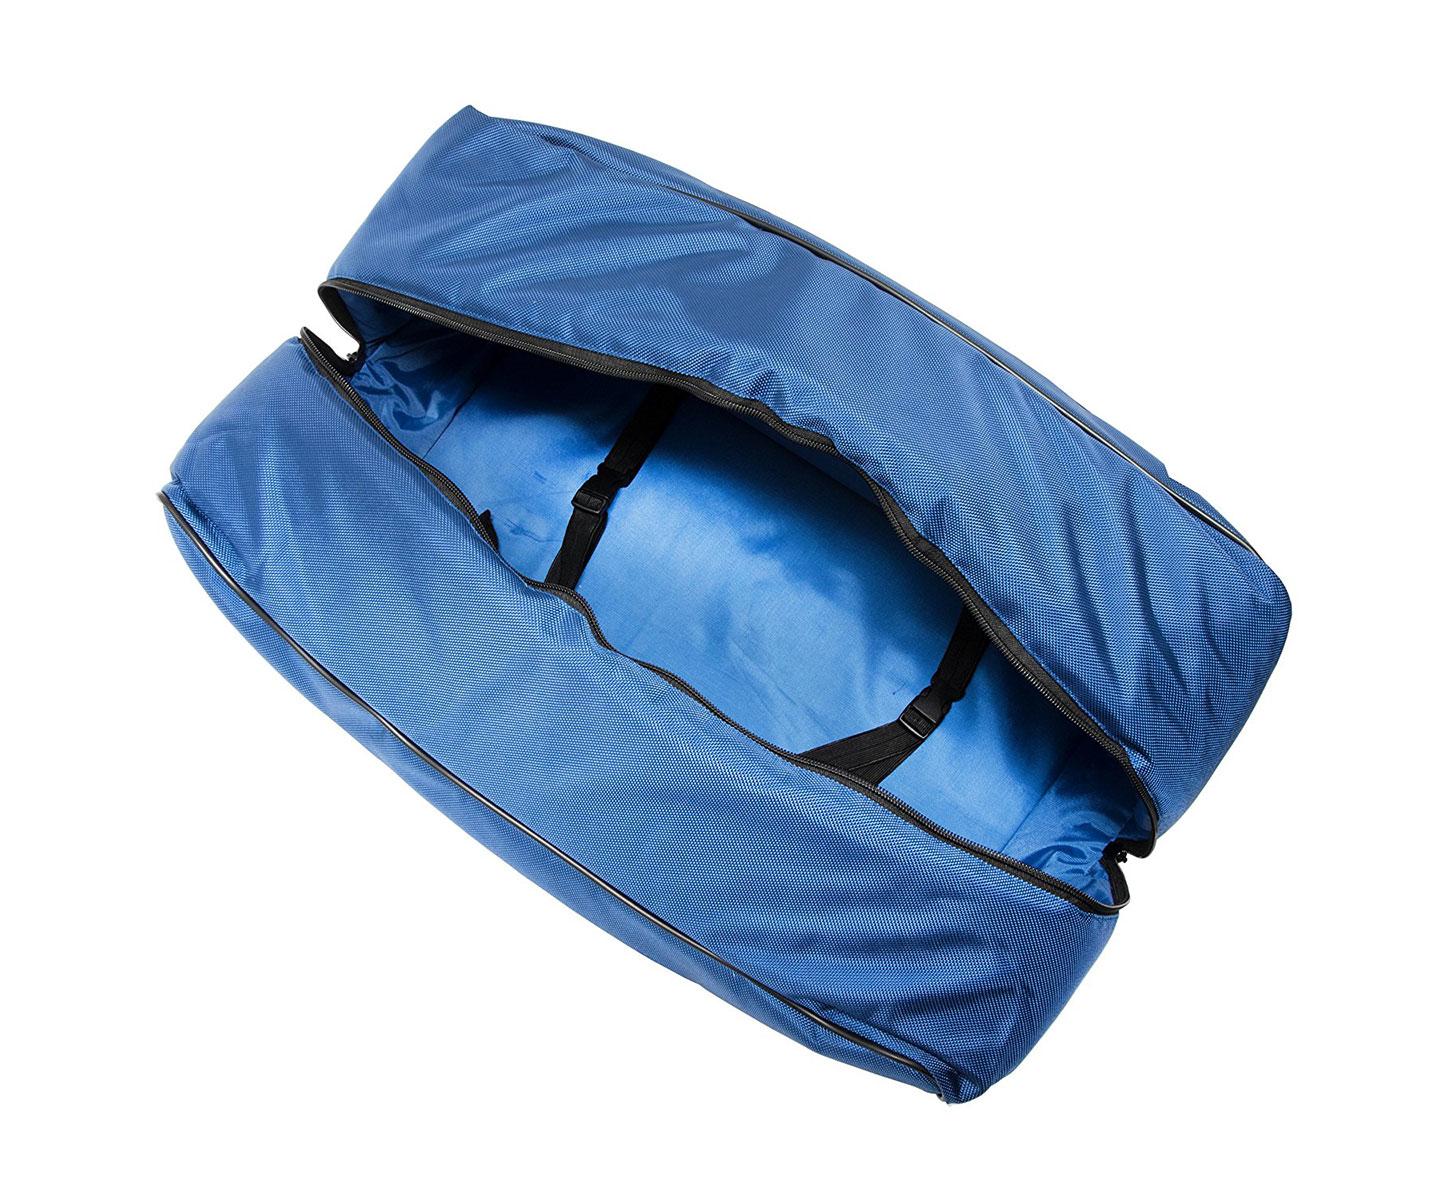     TS-Optics Carrying Case with extra-thick padding - length 540 millimetres   [EN]  